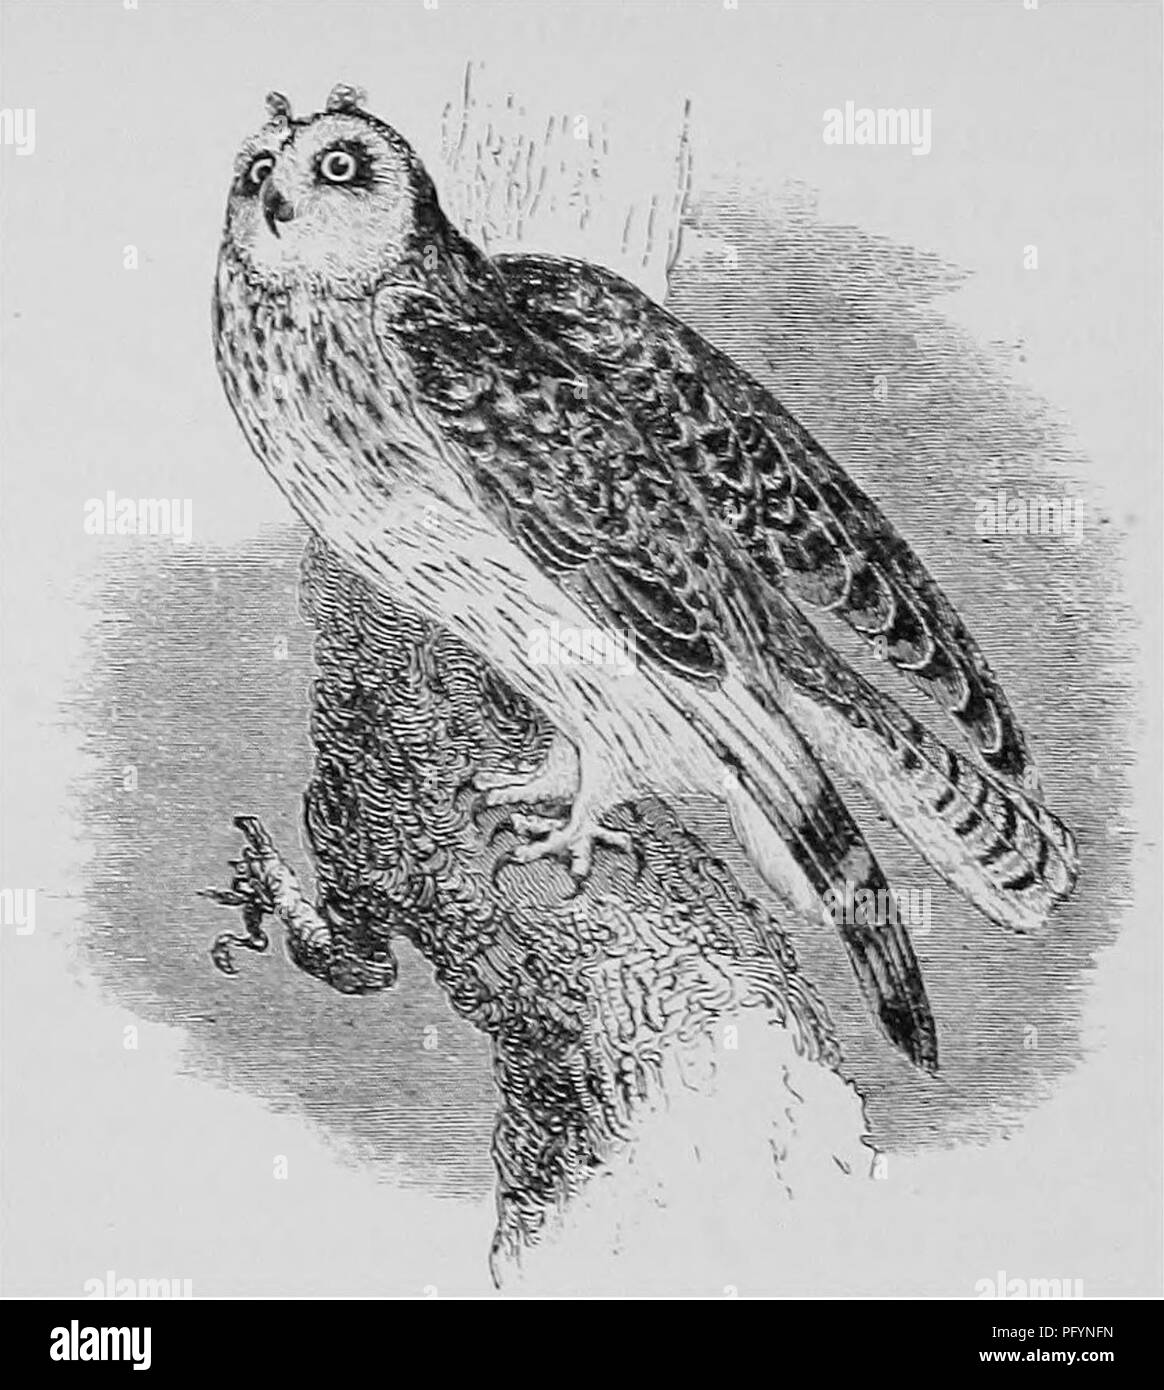 . A popular handbook of the ornithology of the United States and Canada, based on Nuttall's Manual. Birds; Birds. SHORT-EARED OWL. Asio AcciprrpoNus. Char. Above, mottled with dark brown, tawny, and bufEsh white; below, paler ; feet feathered ; ear-tufts inconspicuous. Some examples are much paler, as if the colors had faded. Length about 15 inches. iVest. On the ground amid tall grass, and composed of a few twigs and a few feathers. Eggs. 3-6 ; white and oval; 1.60 X 1.20. This is another of those nocturnal wanderers which now and then arrive amongst us from the northern regions, where they u Stock Photo